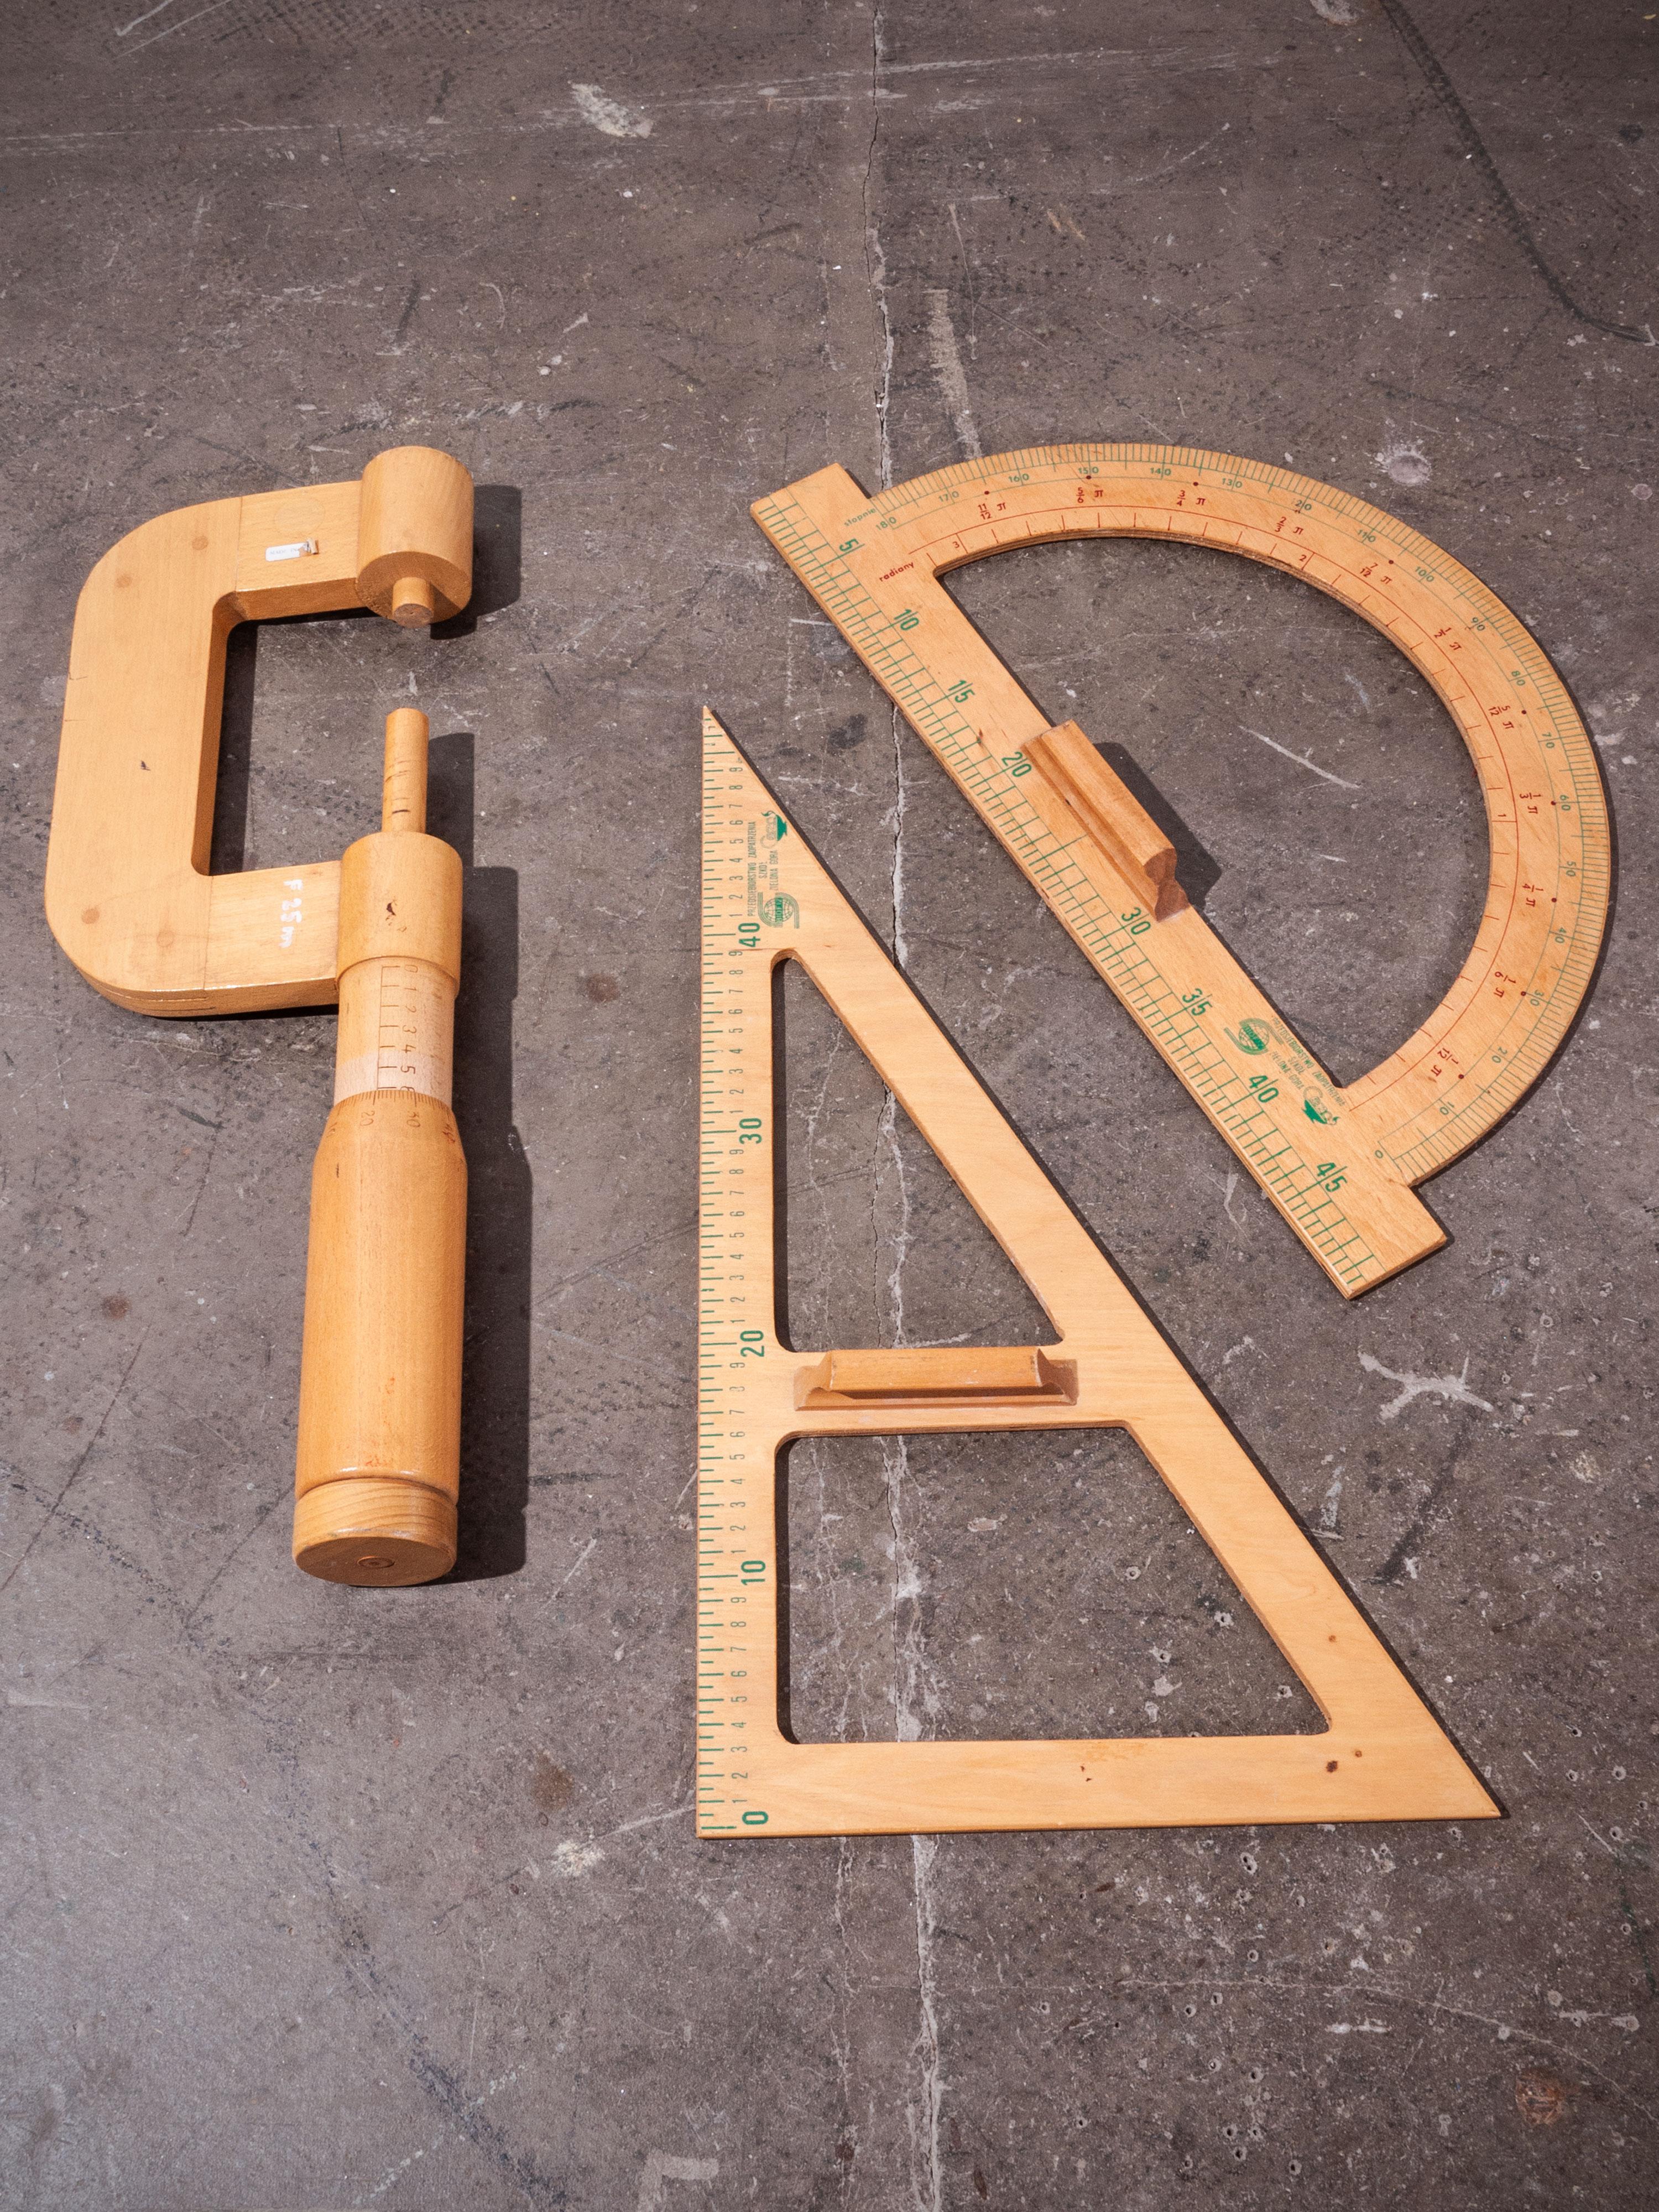 1950s extra large wooden measures set, three pieces
1950s extra large wooden measures set. Featuring an oversize Vernier calliper set and two blackboard geometric drawing shapes. Oversize callipers measure 56 cm in length and are fully